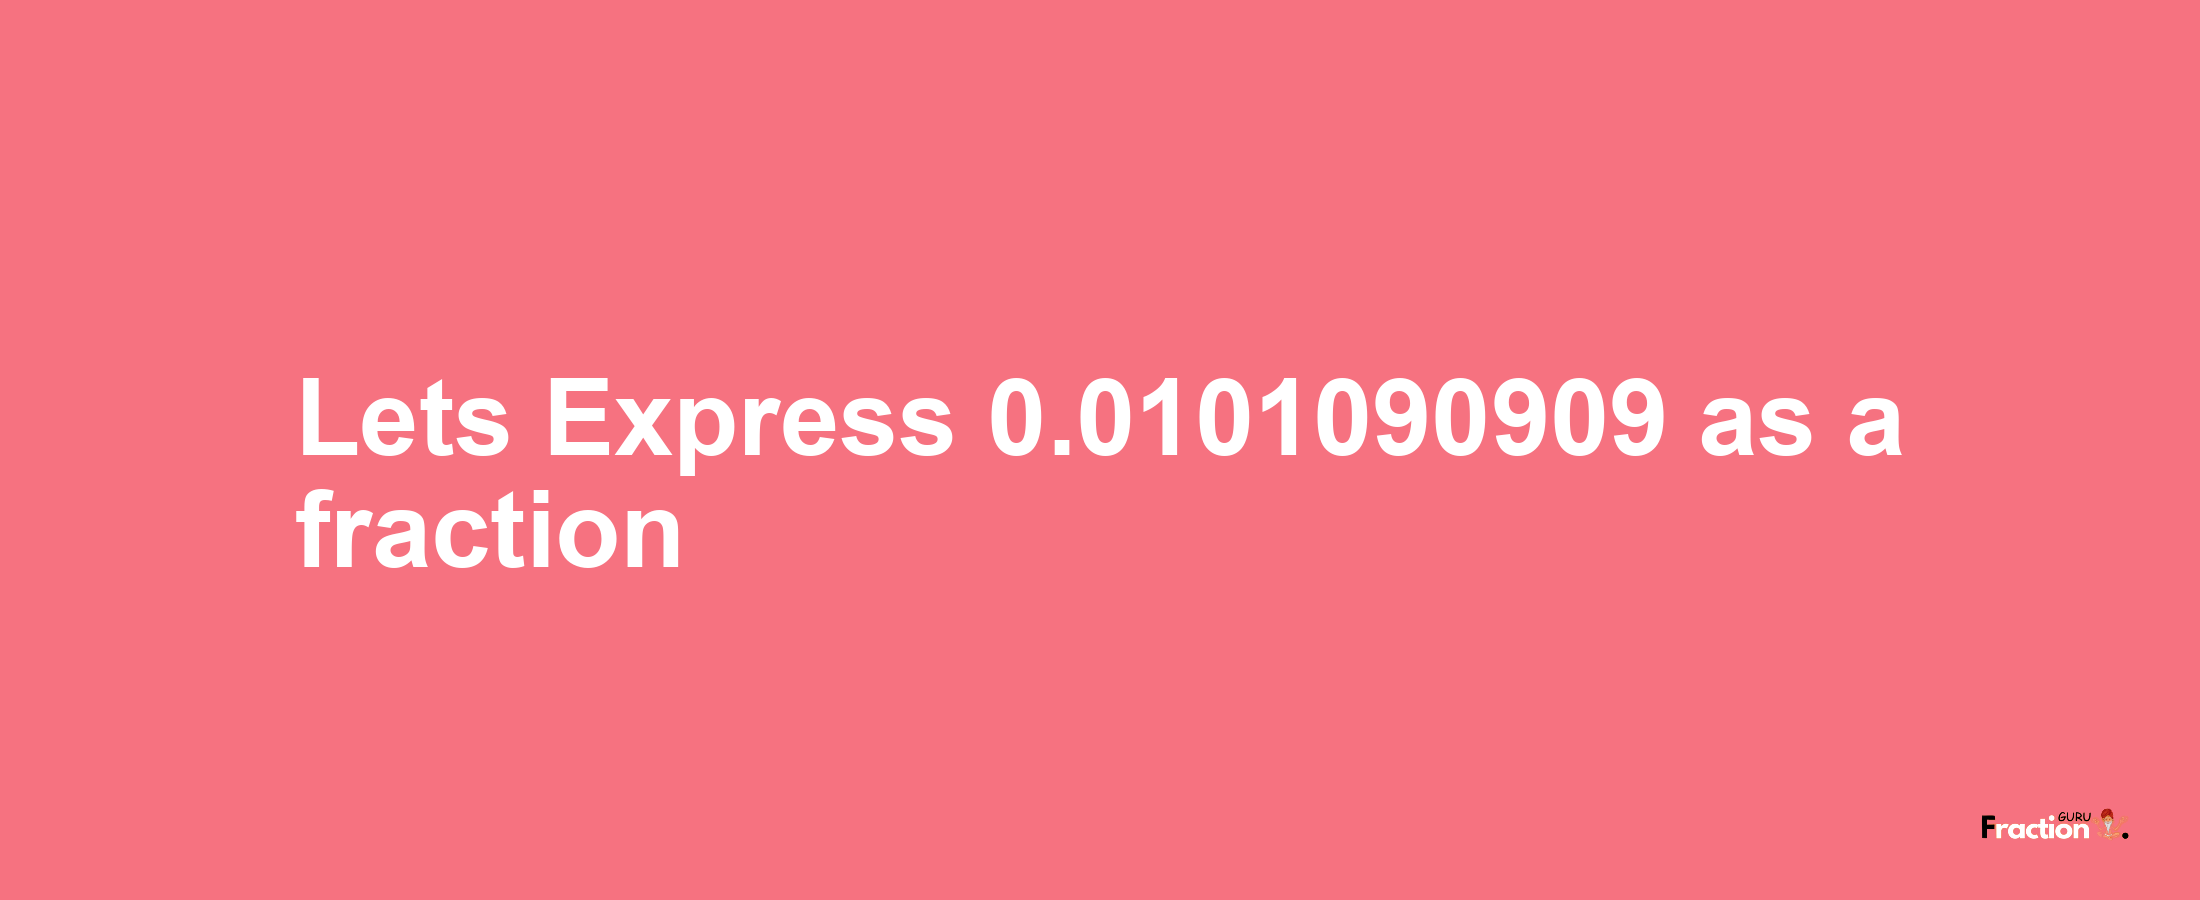 Lets Express 0.0101090909 as afraction